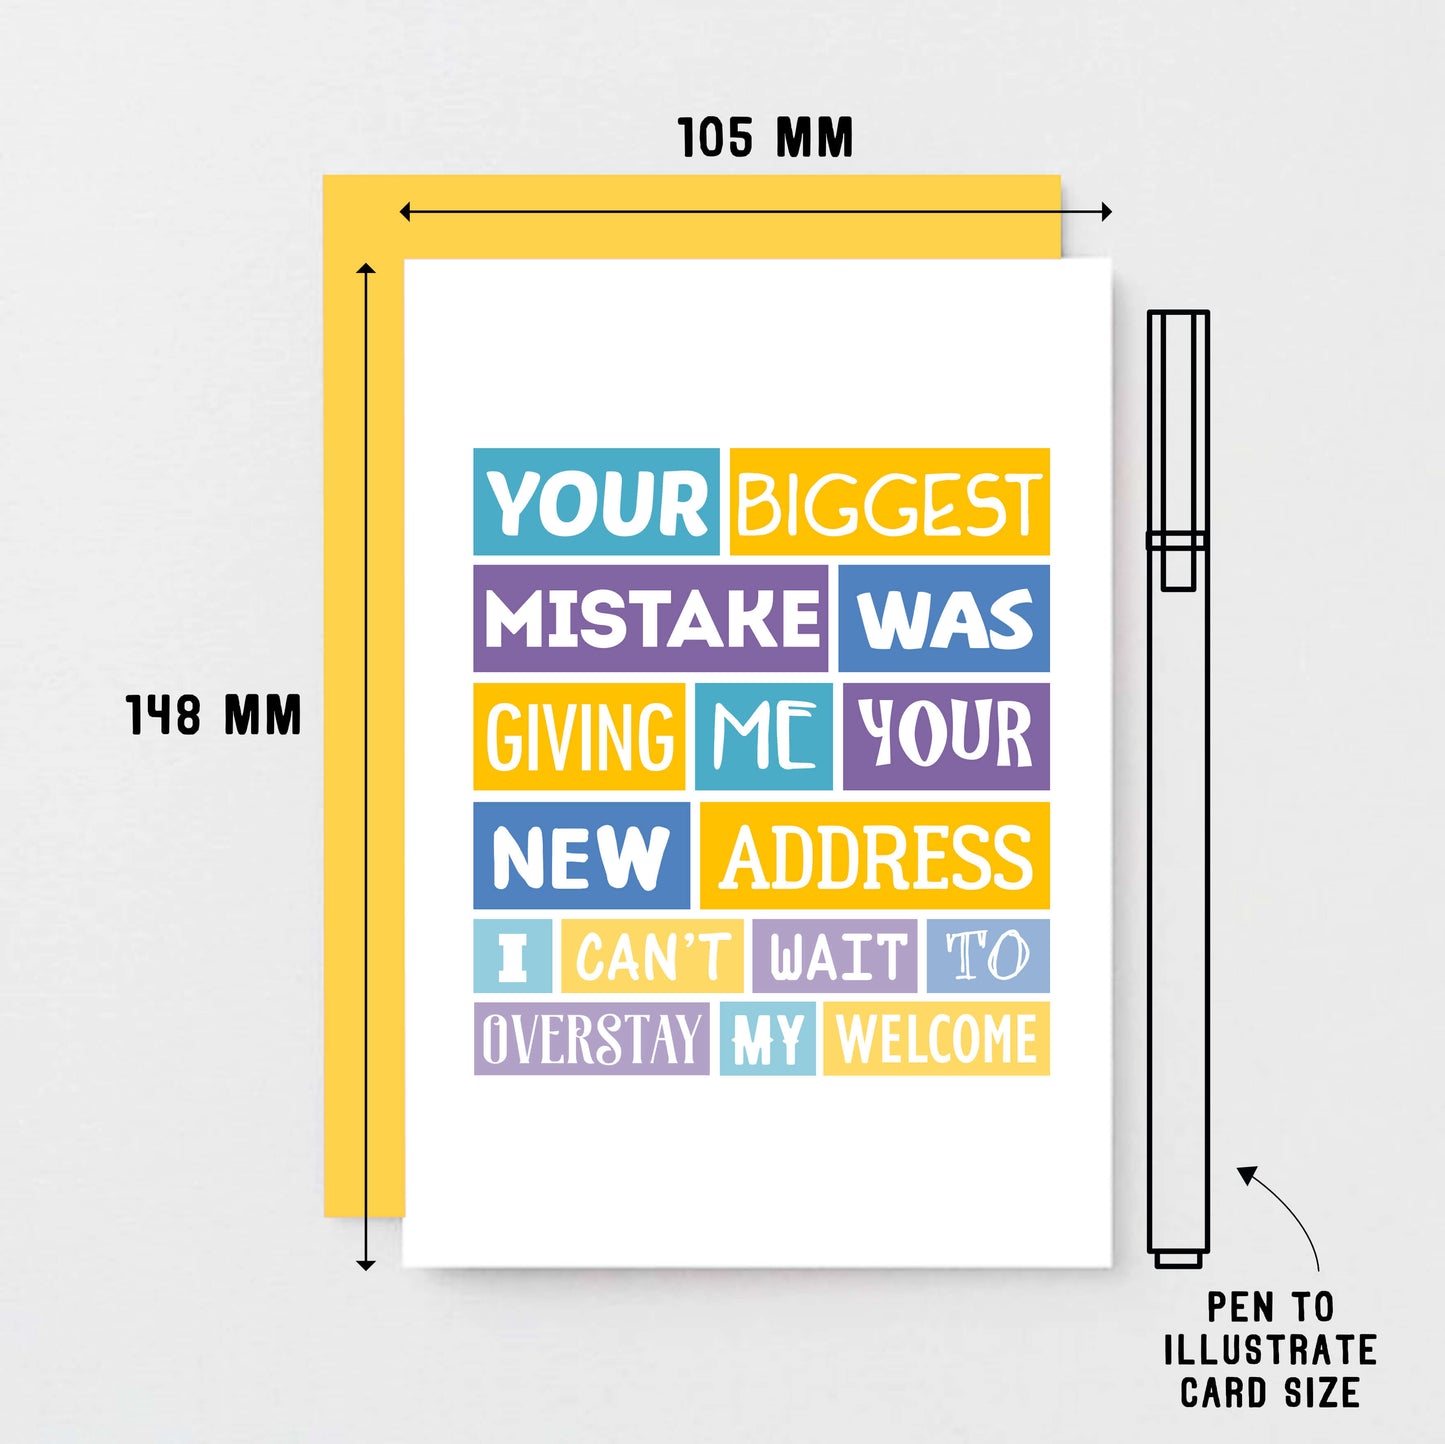 Funny New Home Card by SixElevenCreations. Reads Your biggest mistake was giving me your new address. I can't wait to overstay my welcome. Product Code SE0040A6